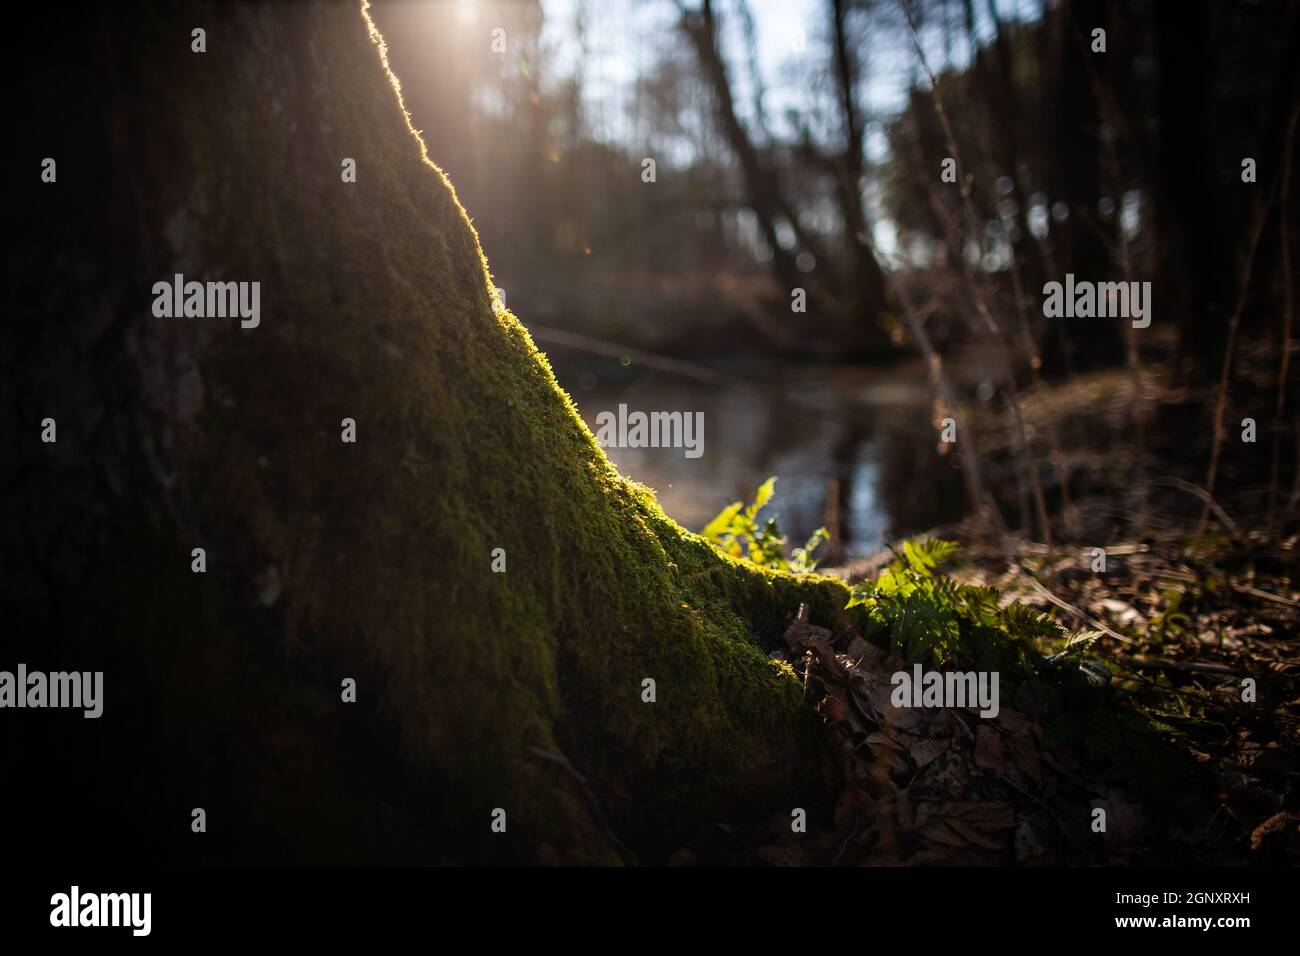 Moss on a tree illuminated by alight of sun going down on sunset, with water, sky and dark trees in the background Stock Photo